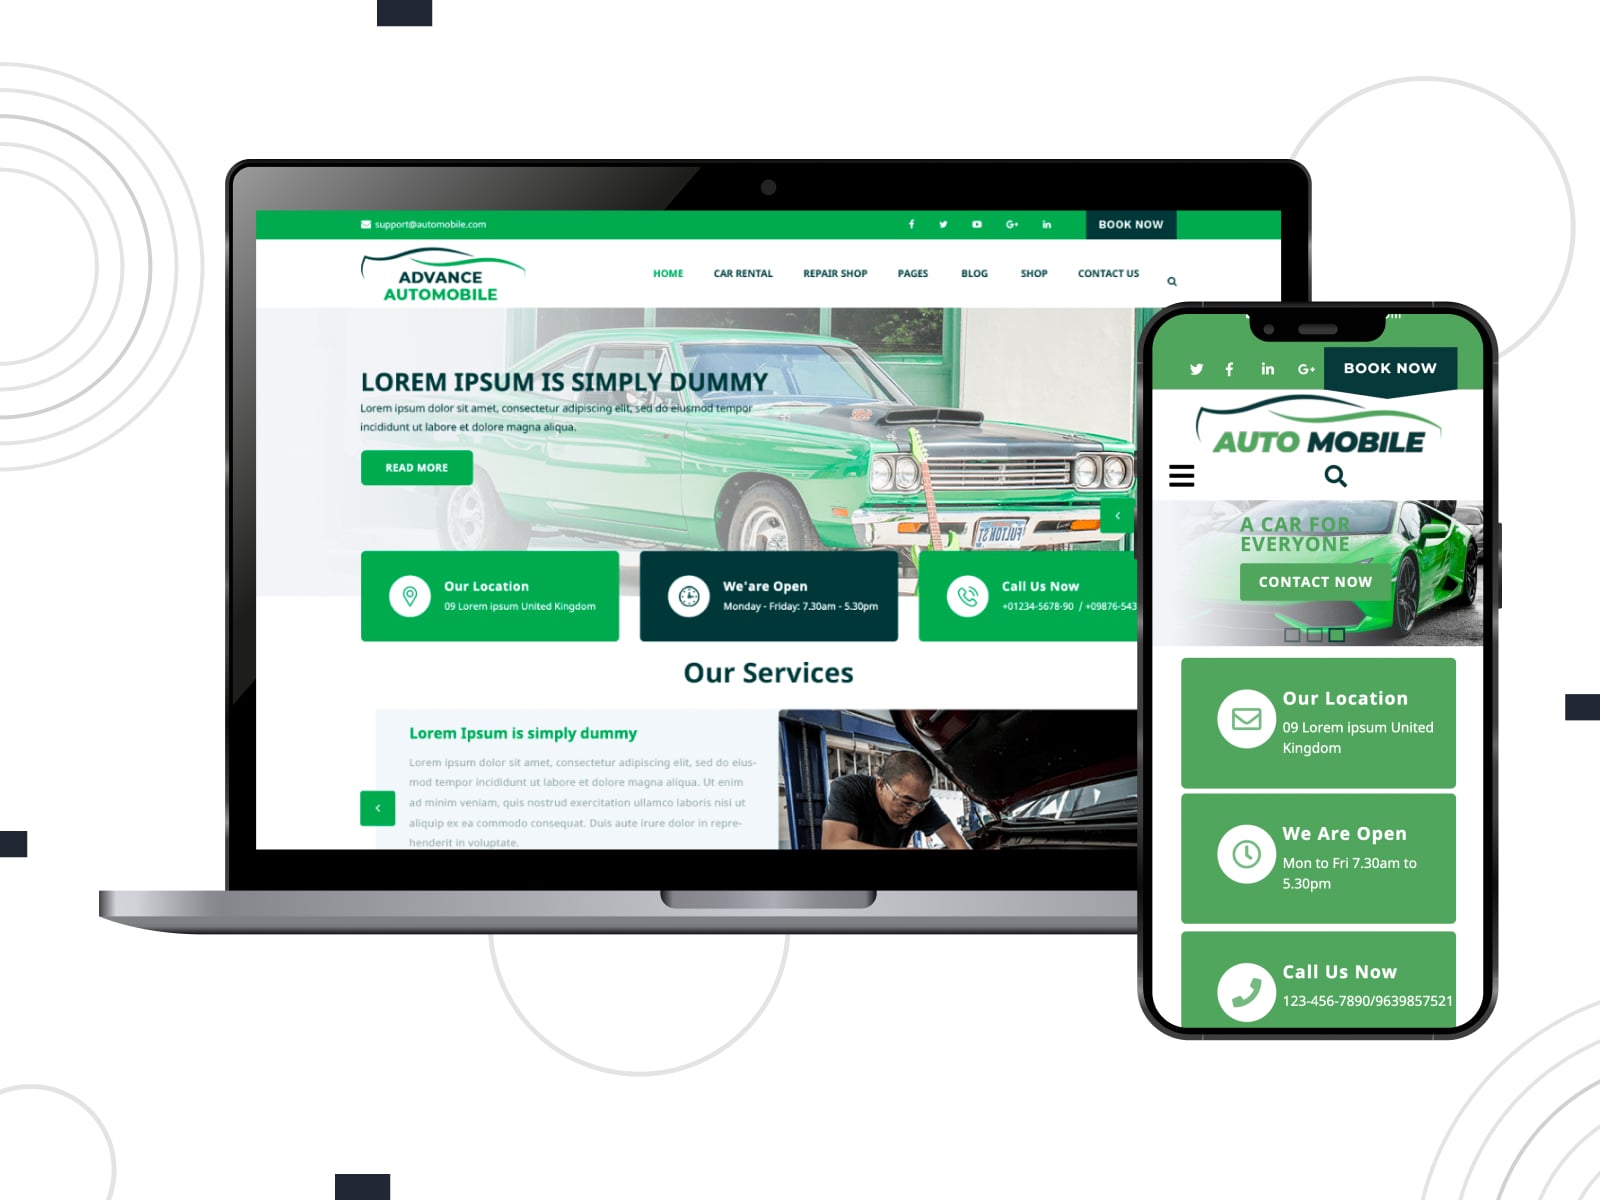 Collage of the Advance Automobile free WordPress repair theme demo site in white, green and black colors.